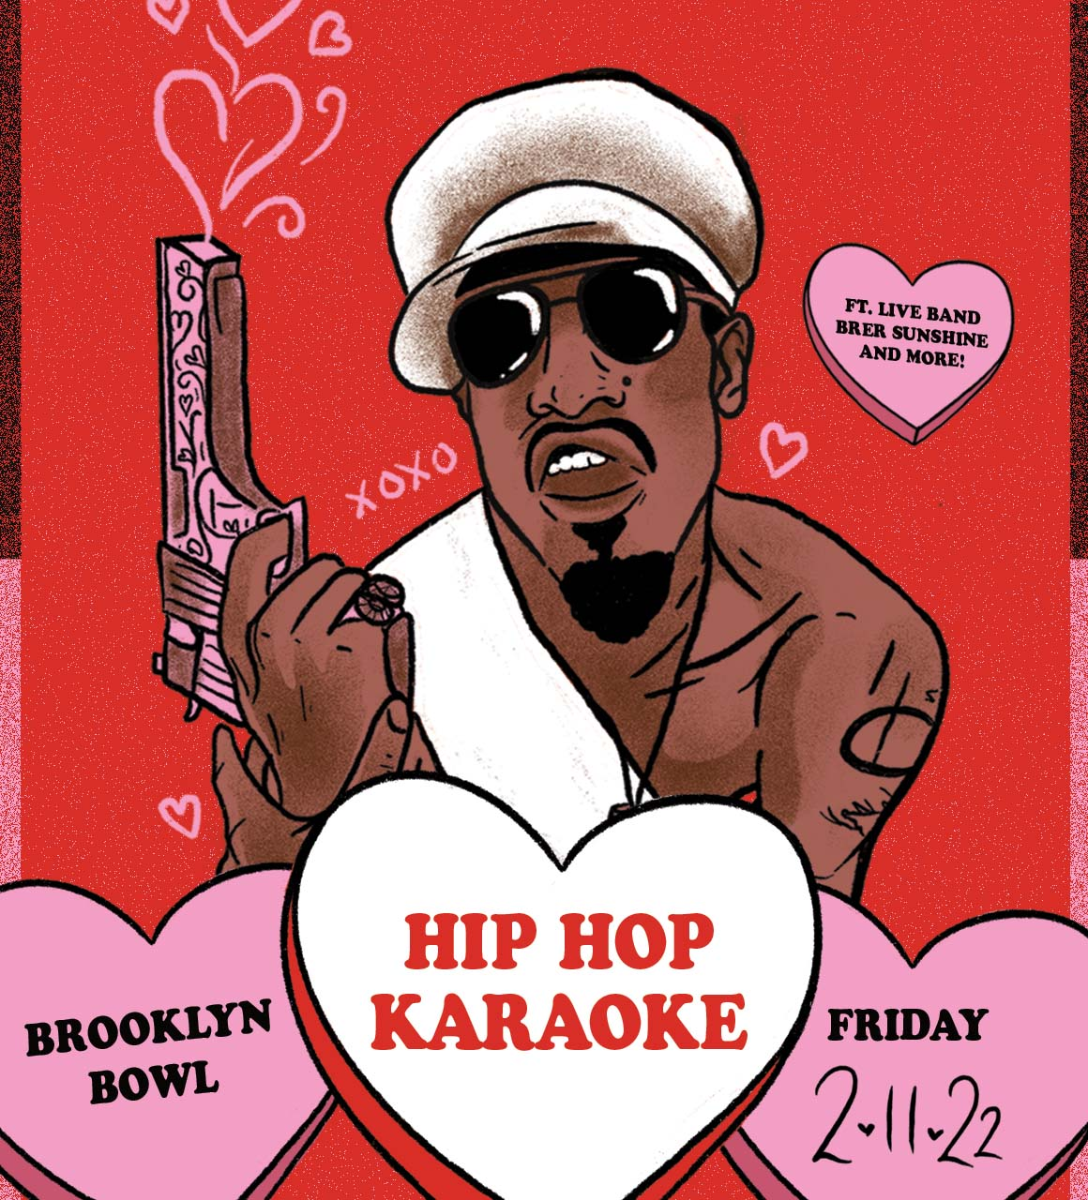 Hip Hop Karaoke: The Valentine's Show with You, A Live Band, and Brer Sunshine - Performing Hip Hop Tracks